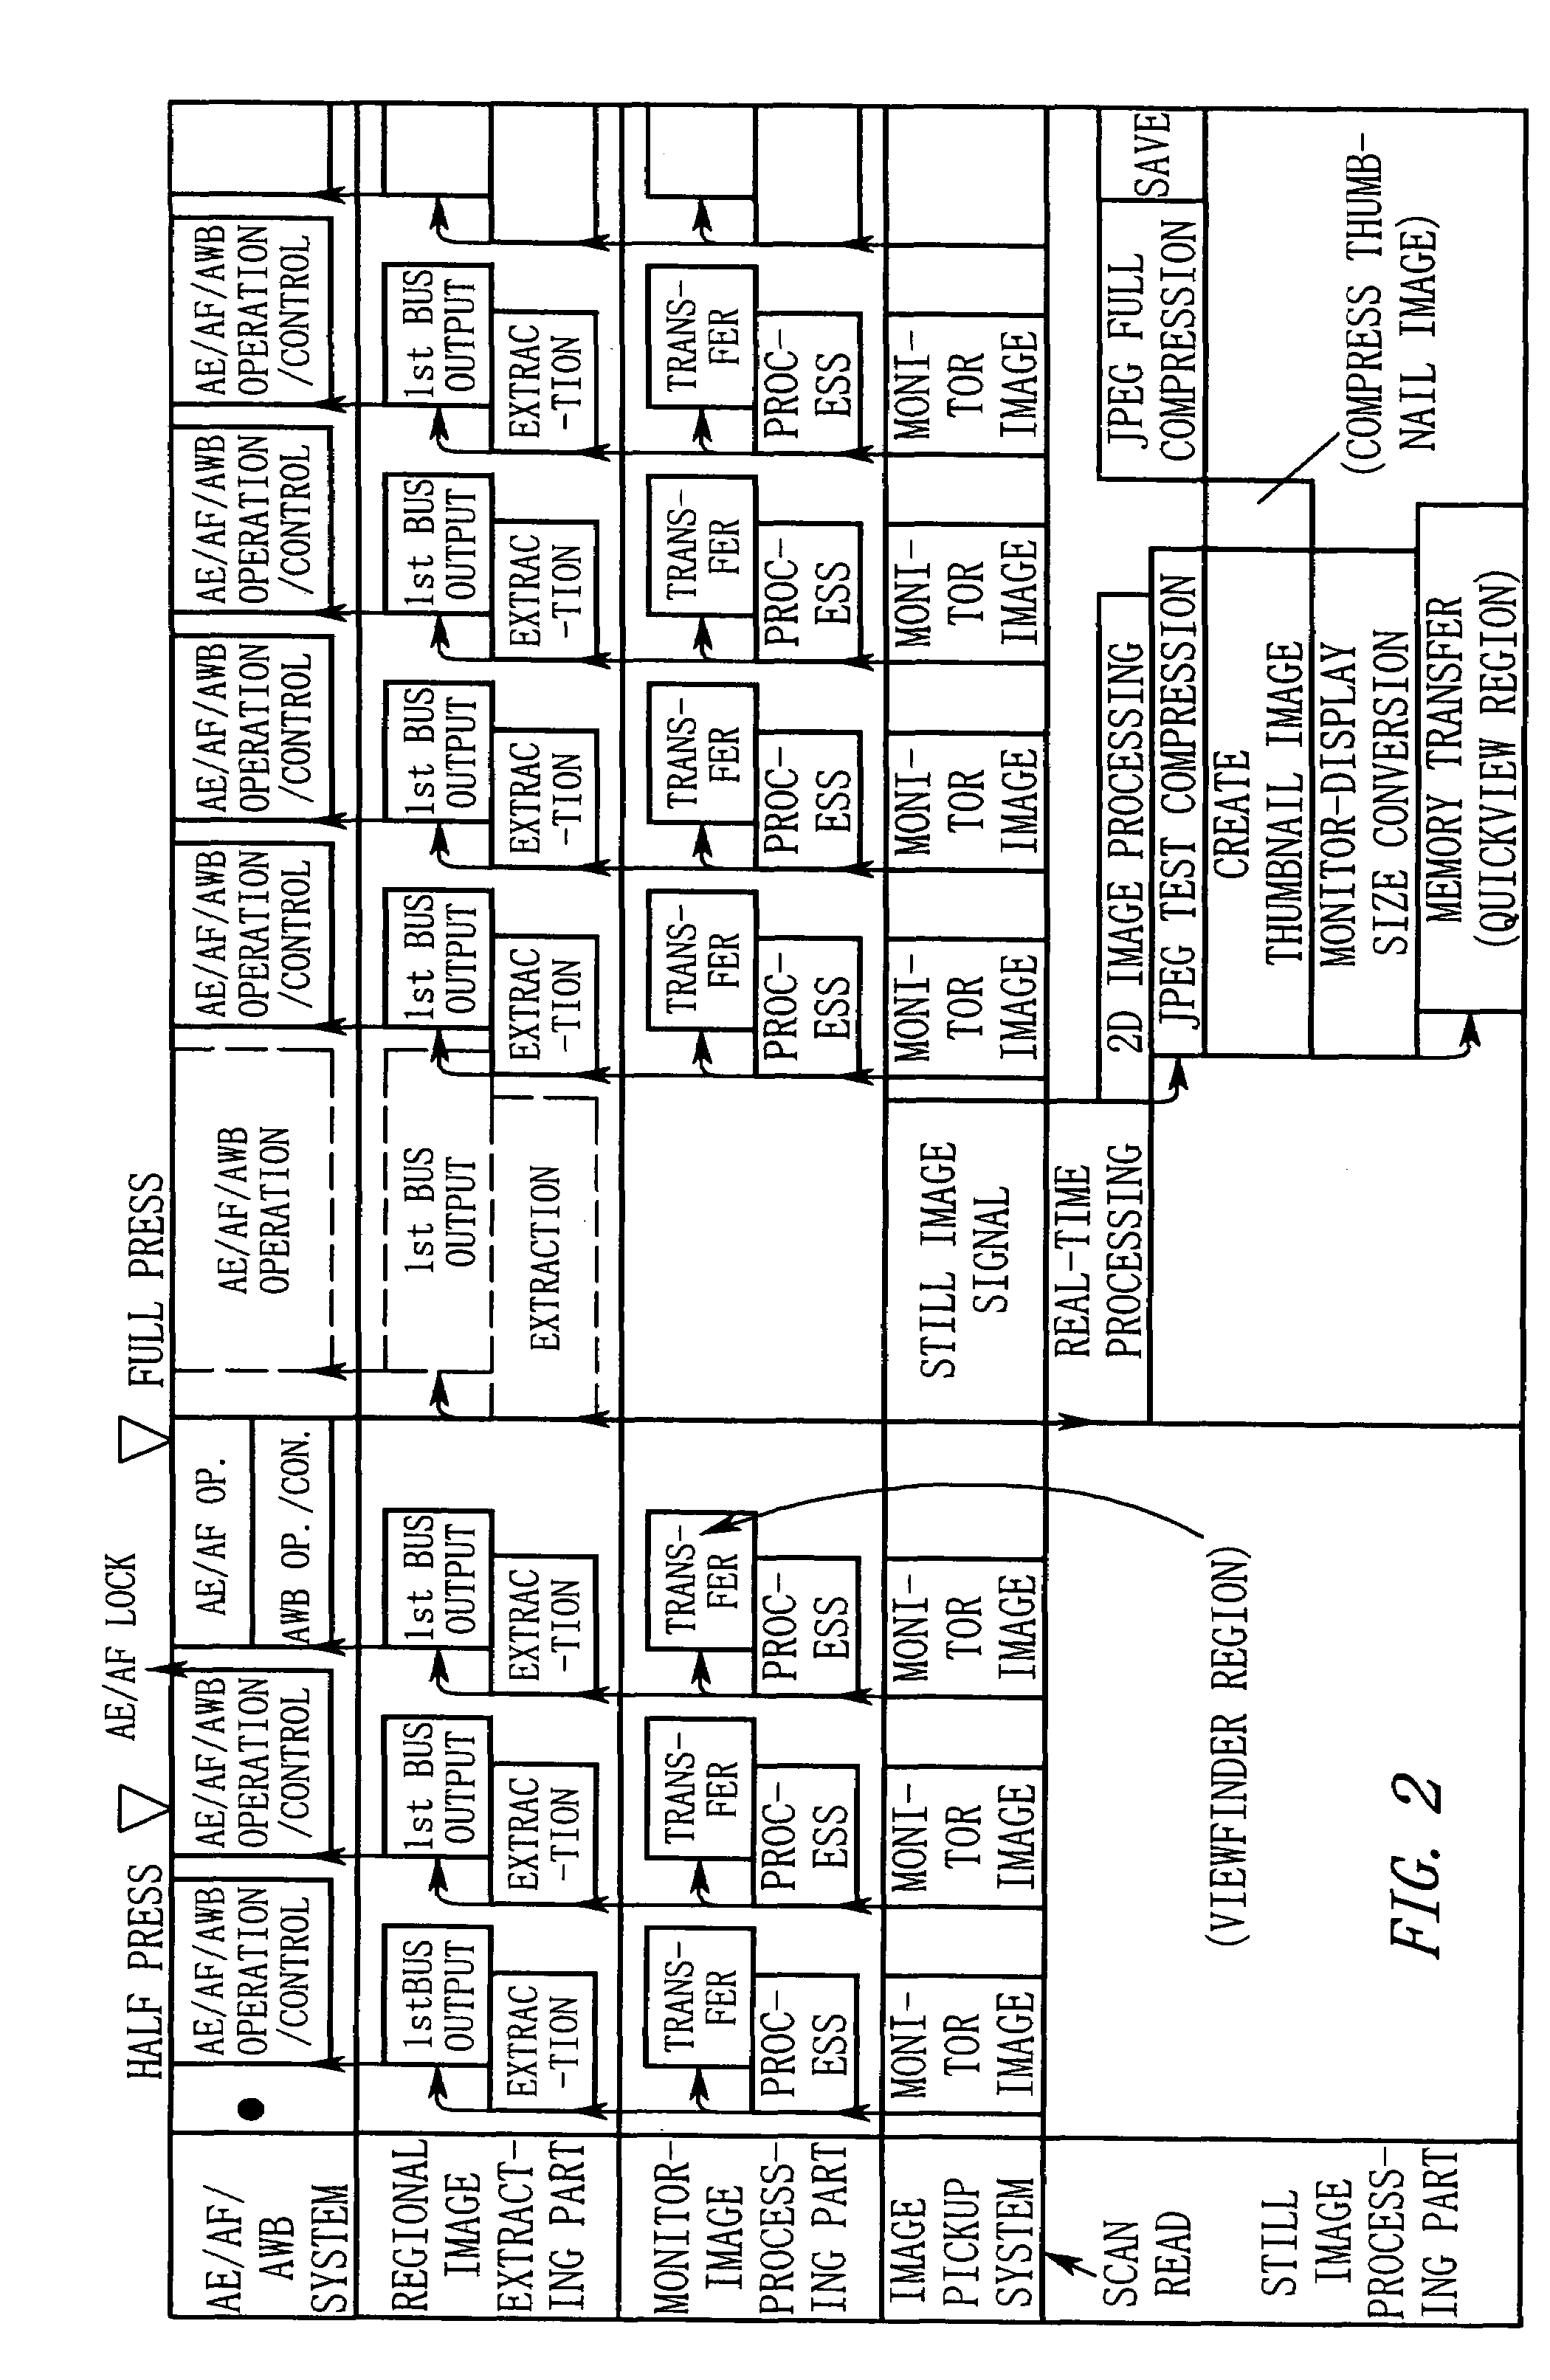 Electronic camera for displaying a preview image during still image capture